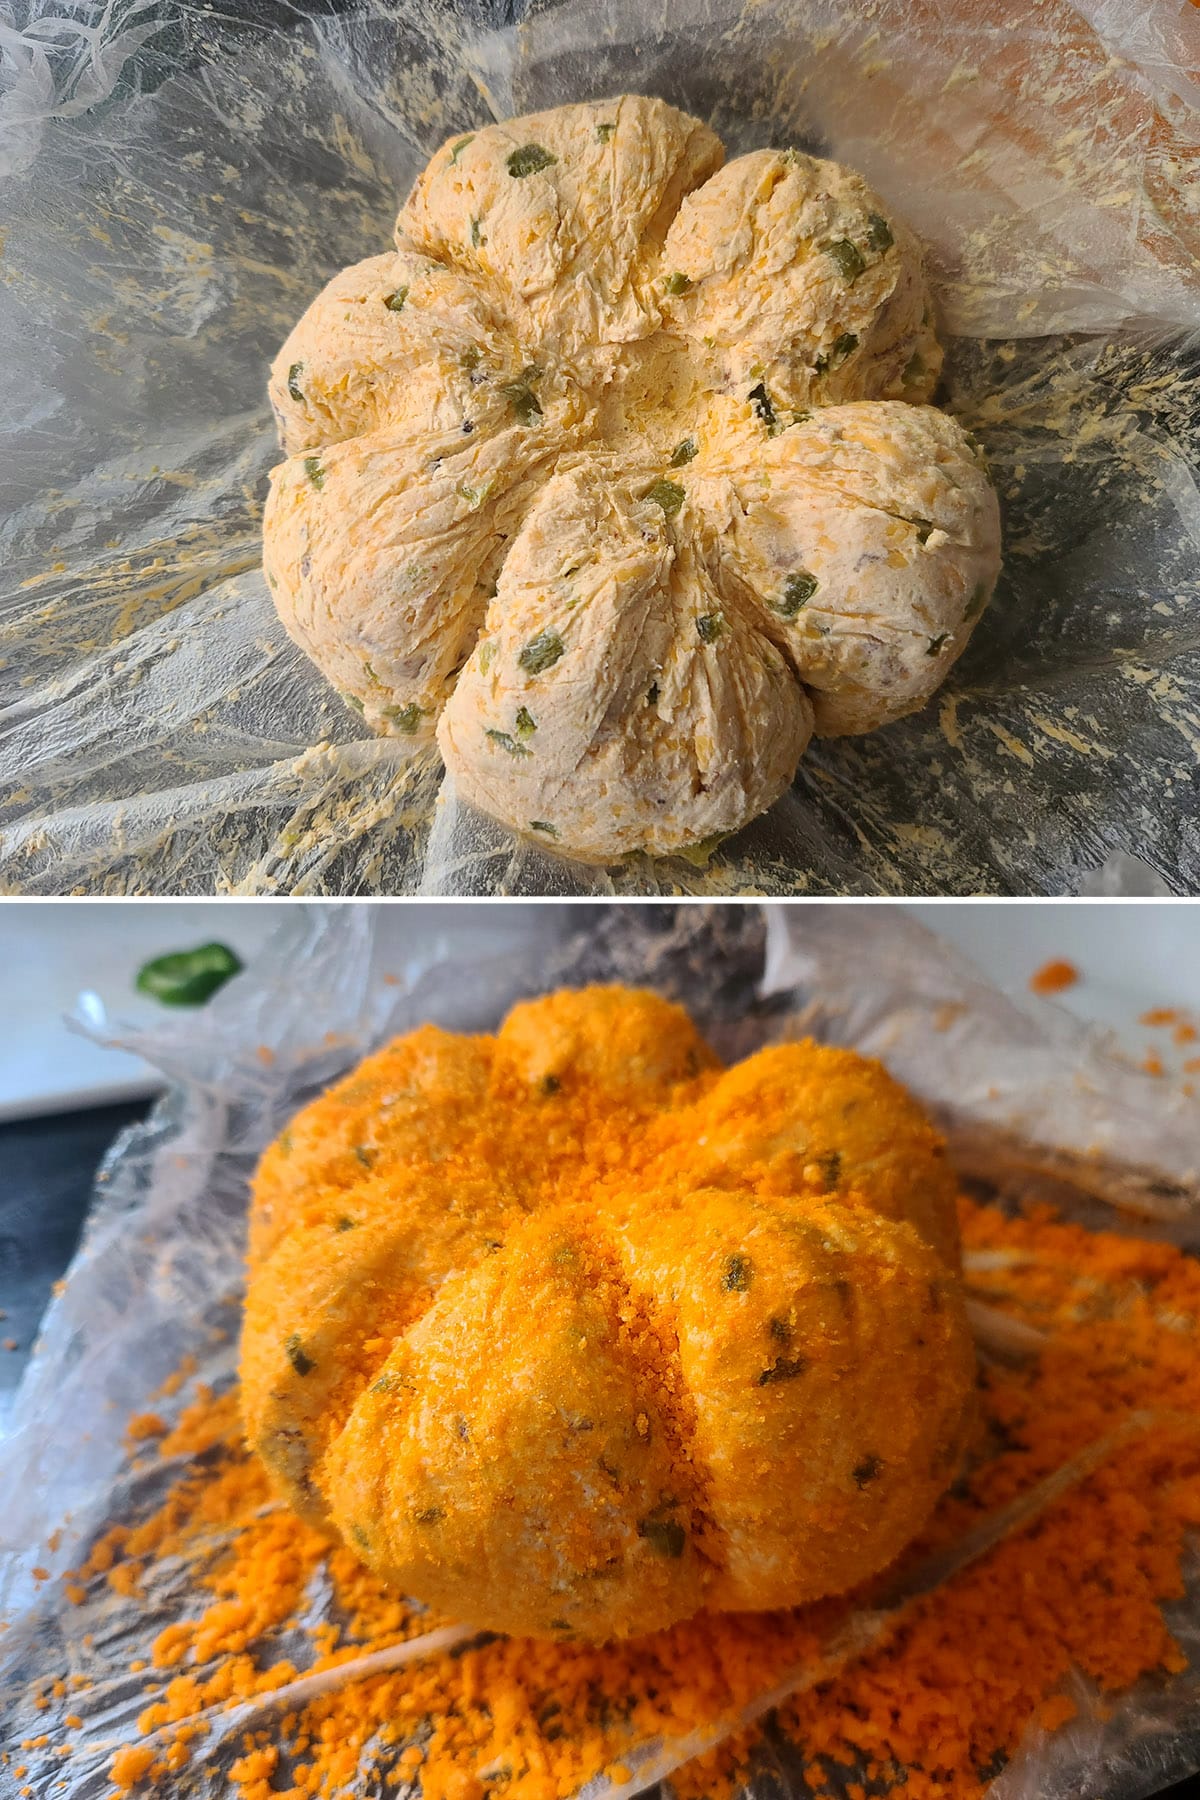 A 2 part image showing the chilled cheese ball being coated in Cheezies dust.